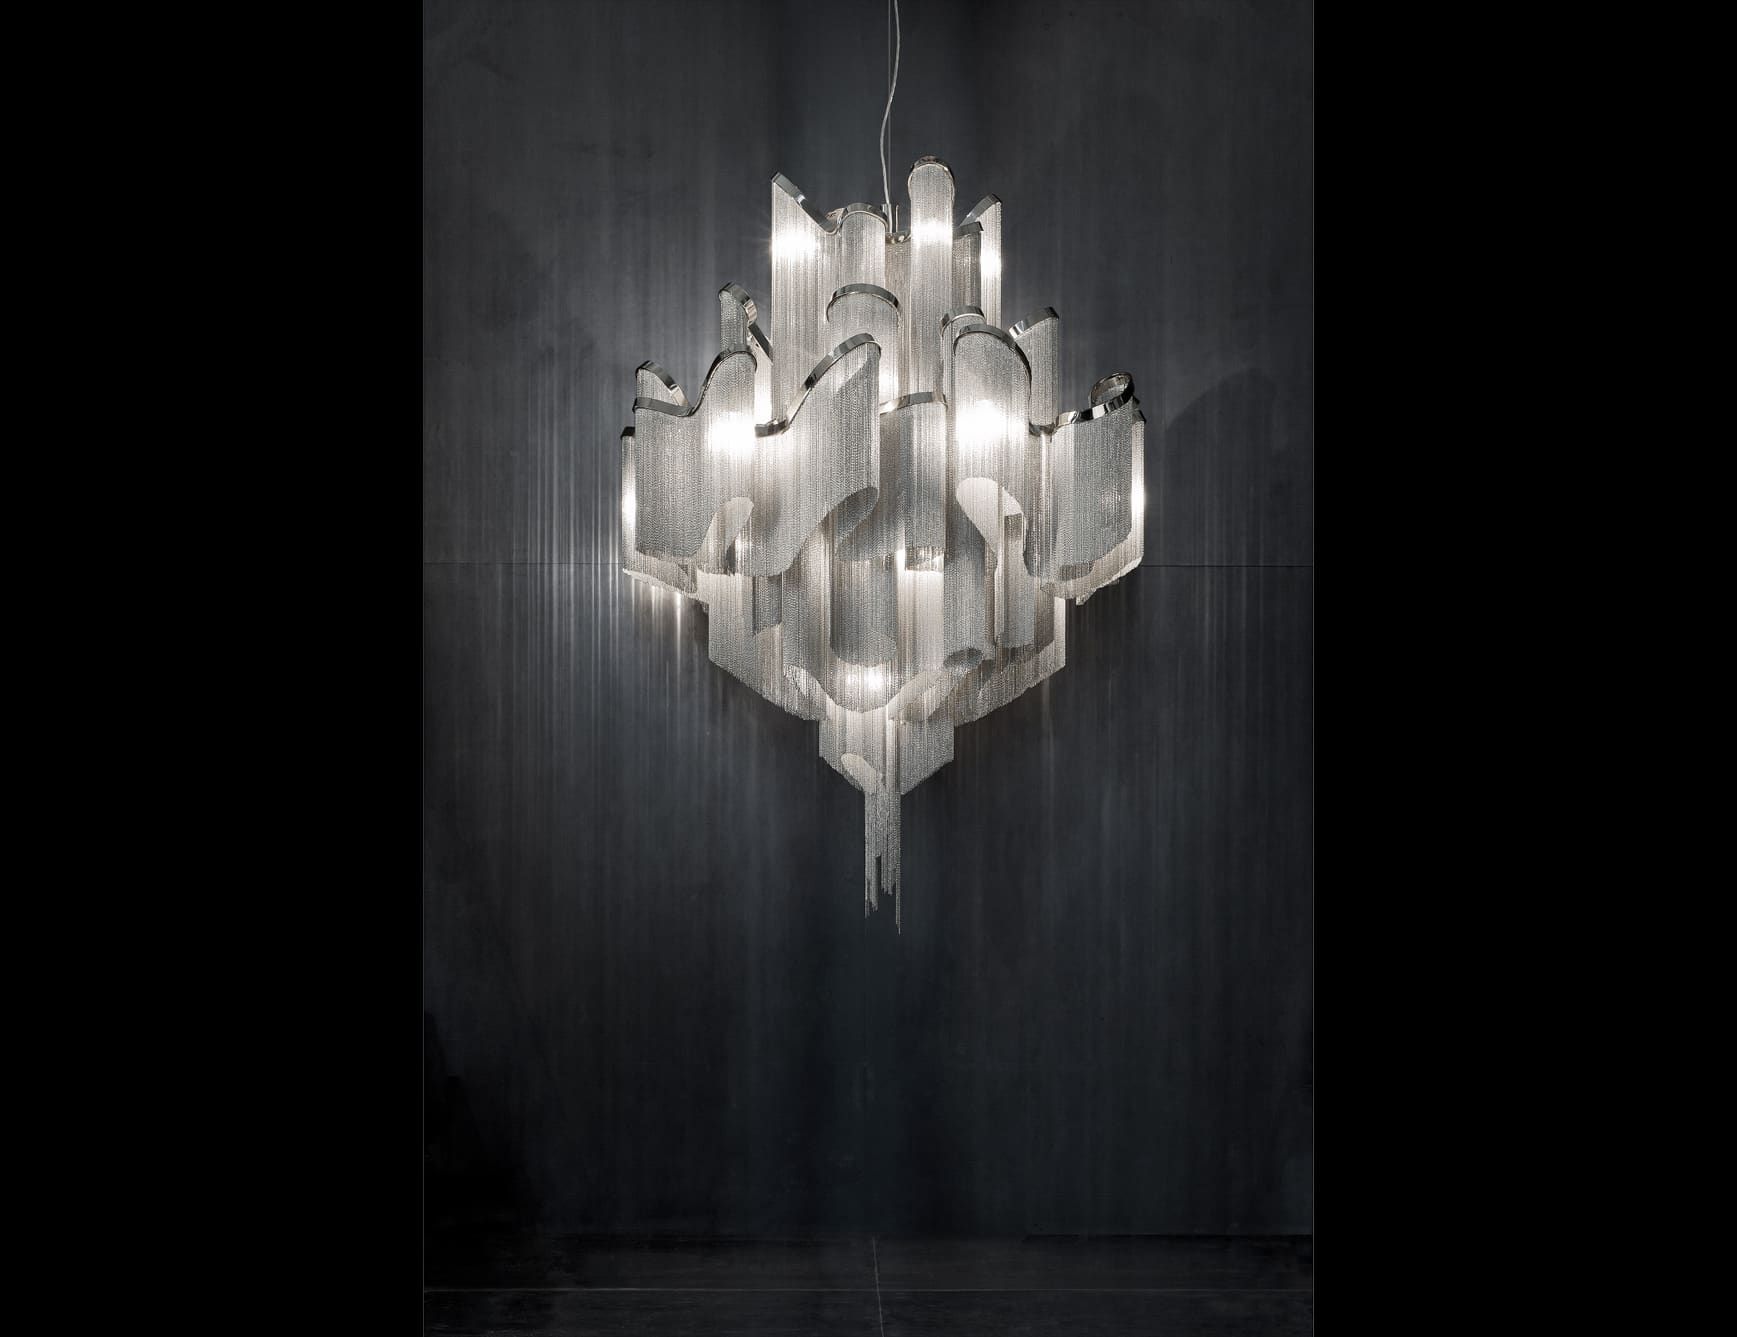 Stream contemporary Italian hanging light with silver metal